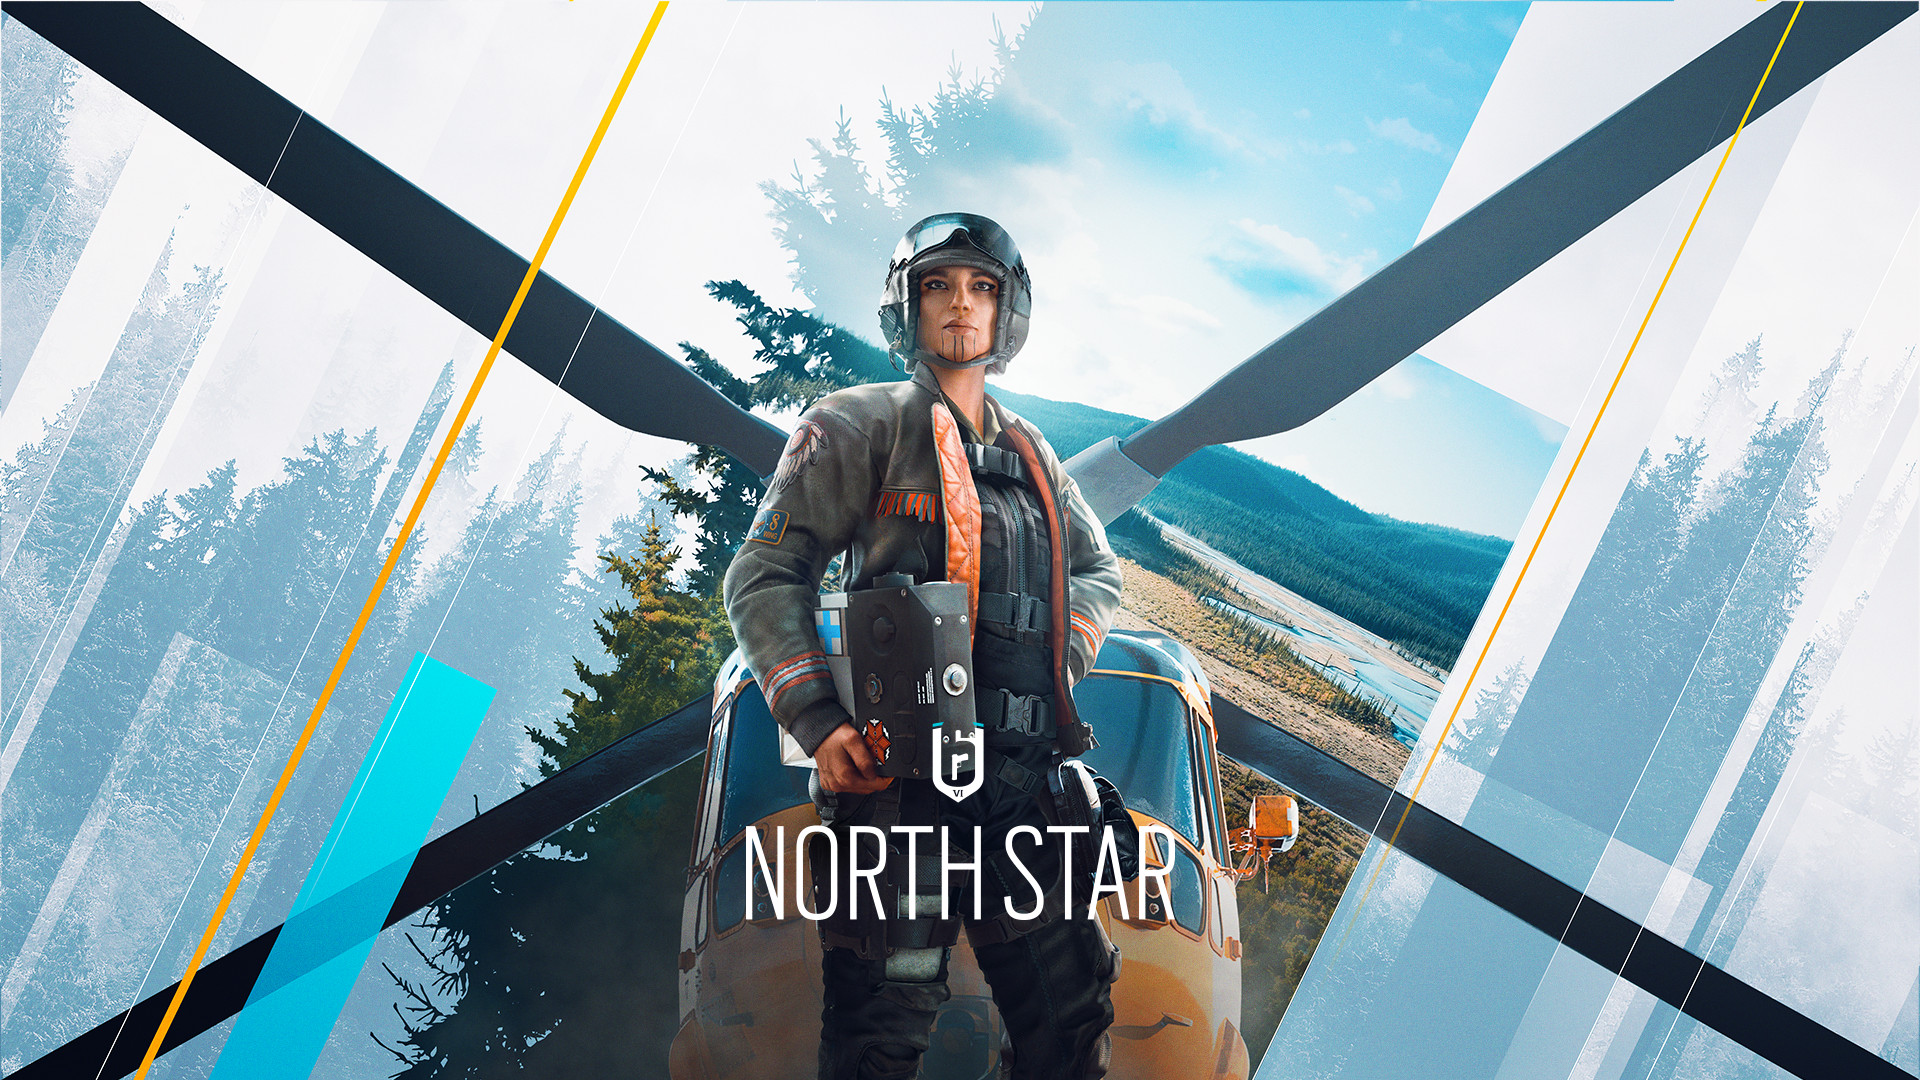 Rainbow Six Siege North Star: Official Operation North Star promotional art, showing Thunderbird standing in front of a helicopter, with the blades reaching into the corners of the image.